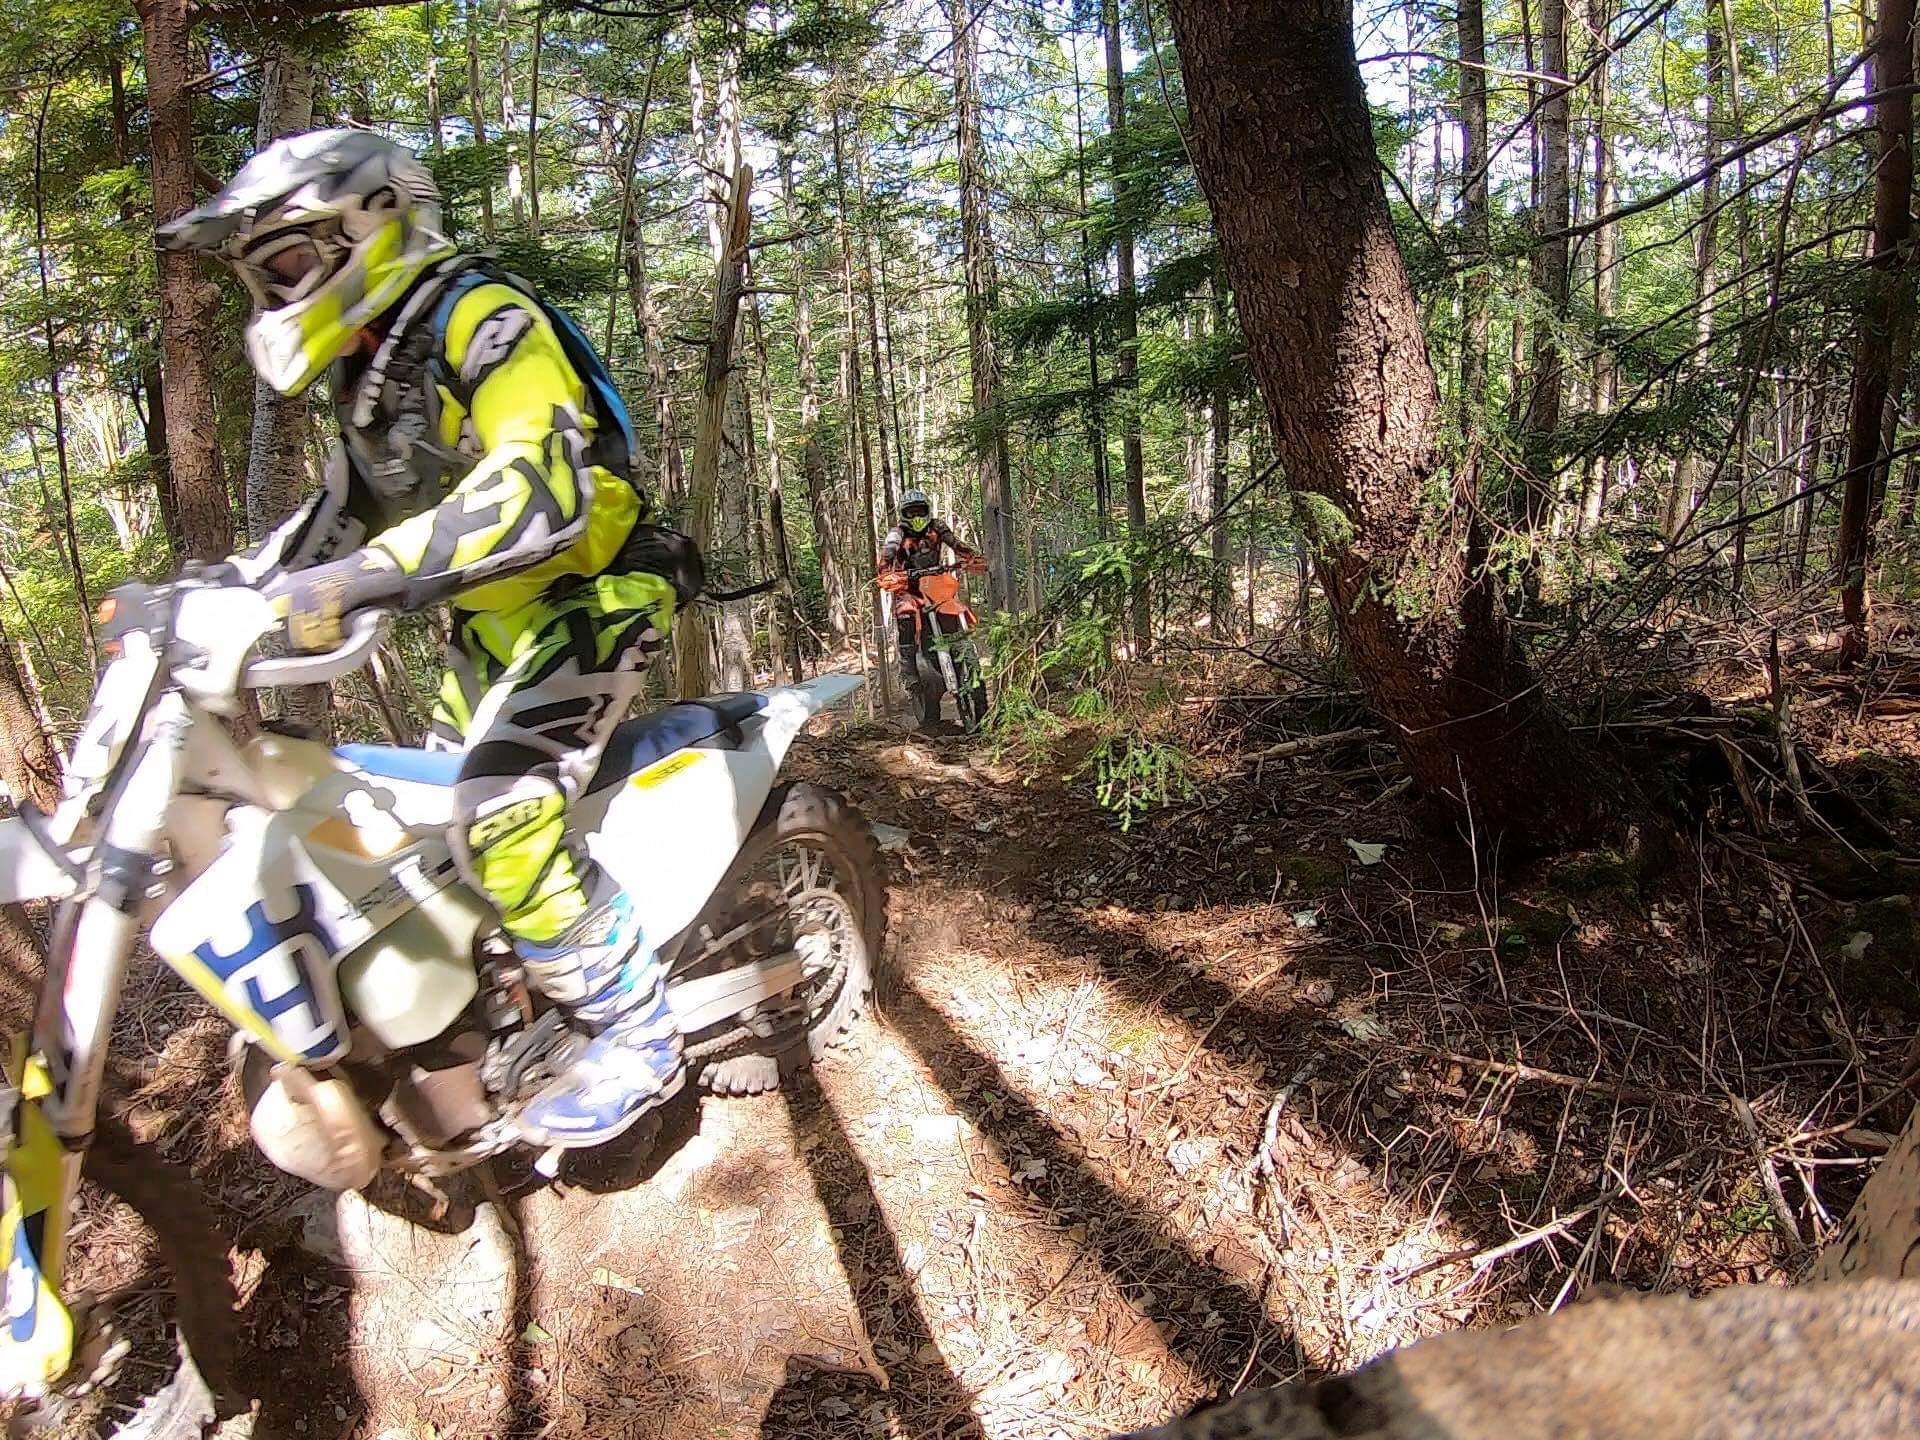 Two dirt bikers riding through the woods